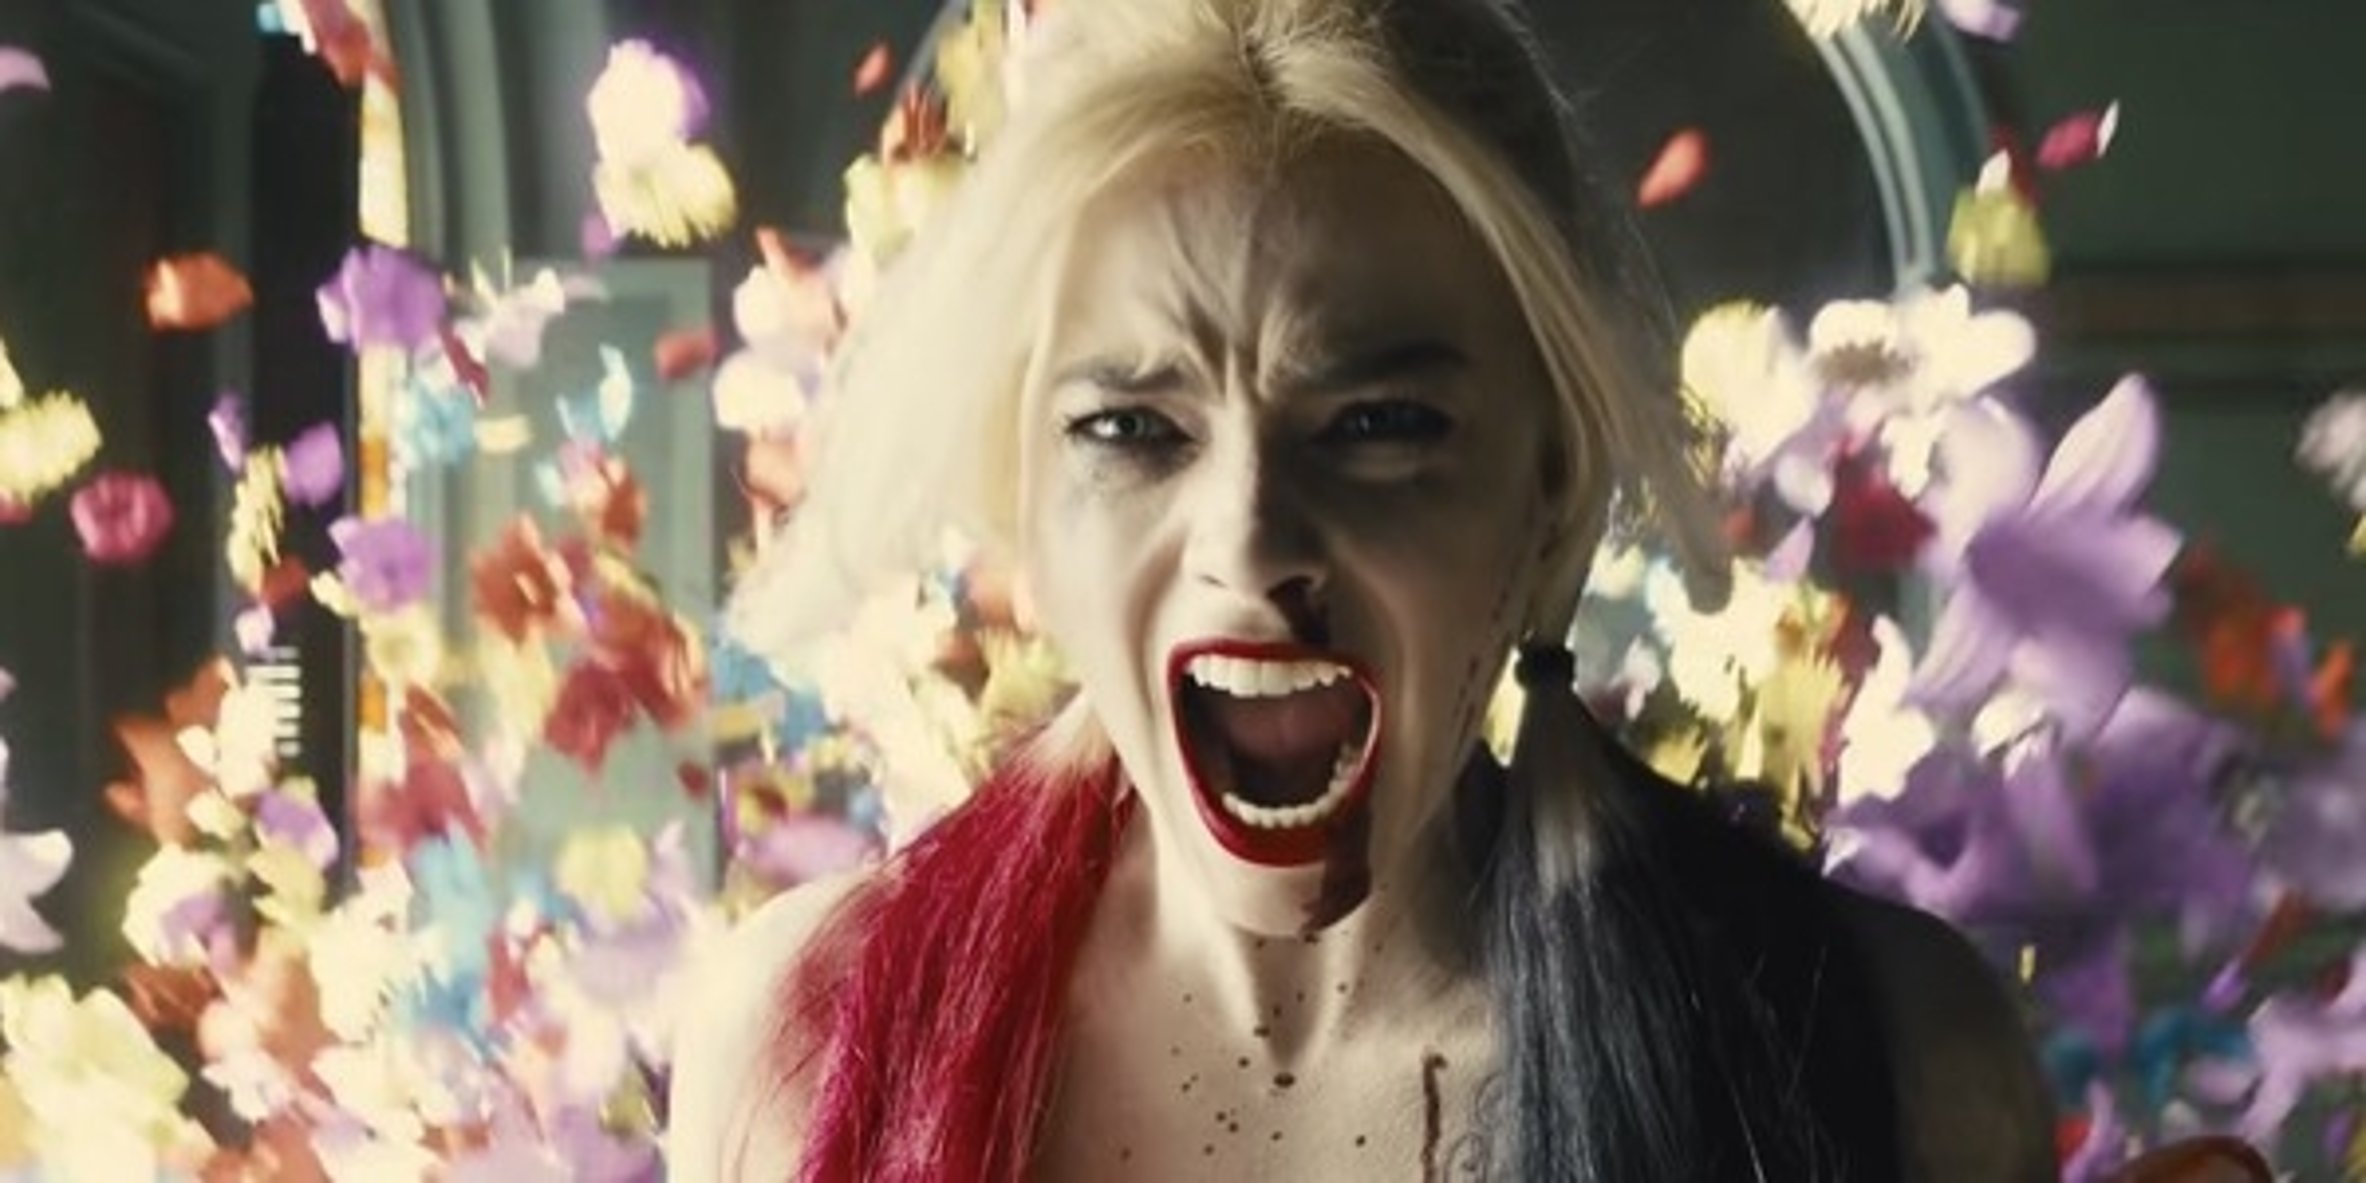 Margot Robbie, Who Plays Harley Quinn In The Suicide Squad, Talks About The Physical Toll Of Filming.